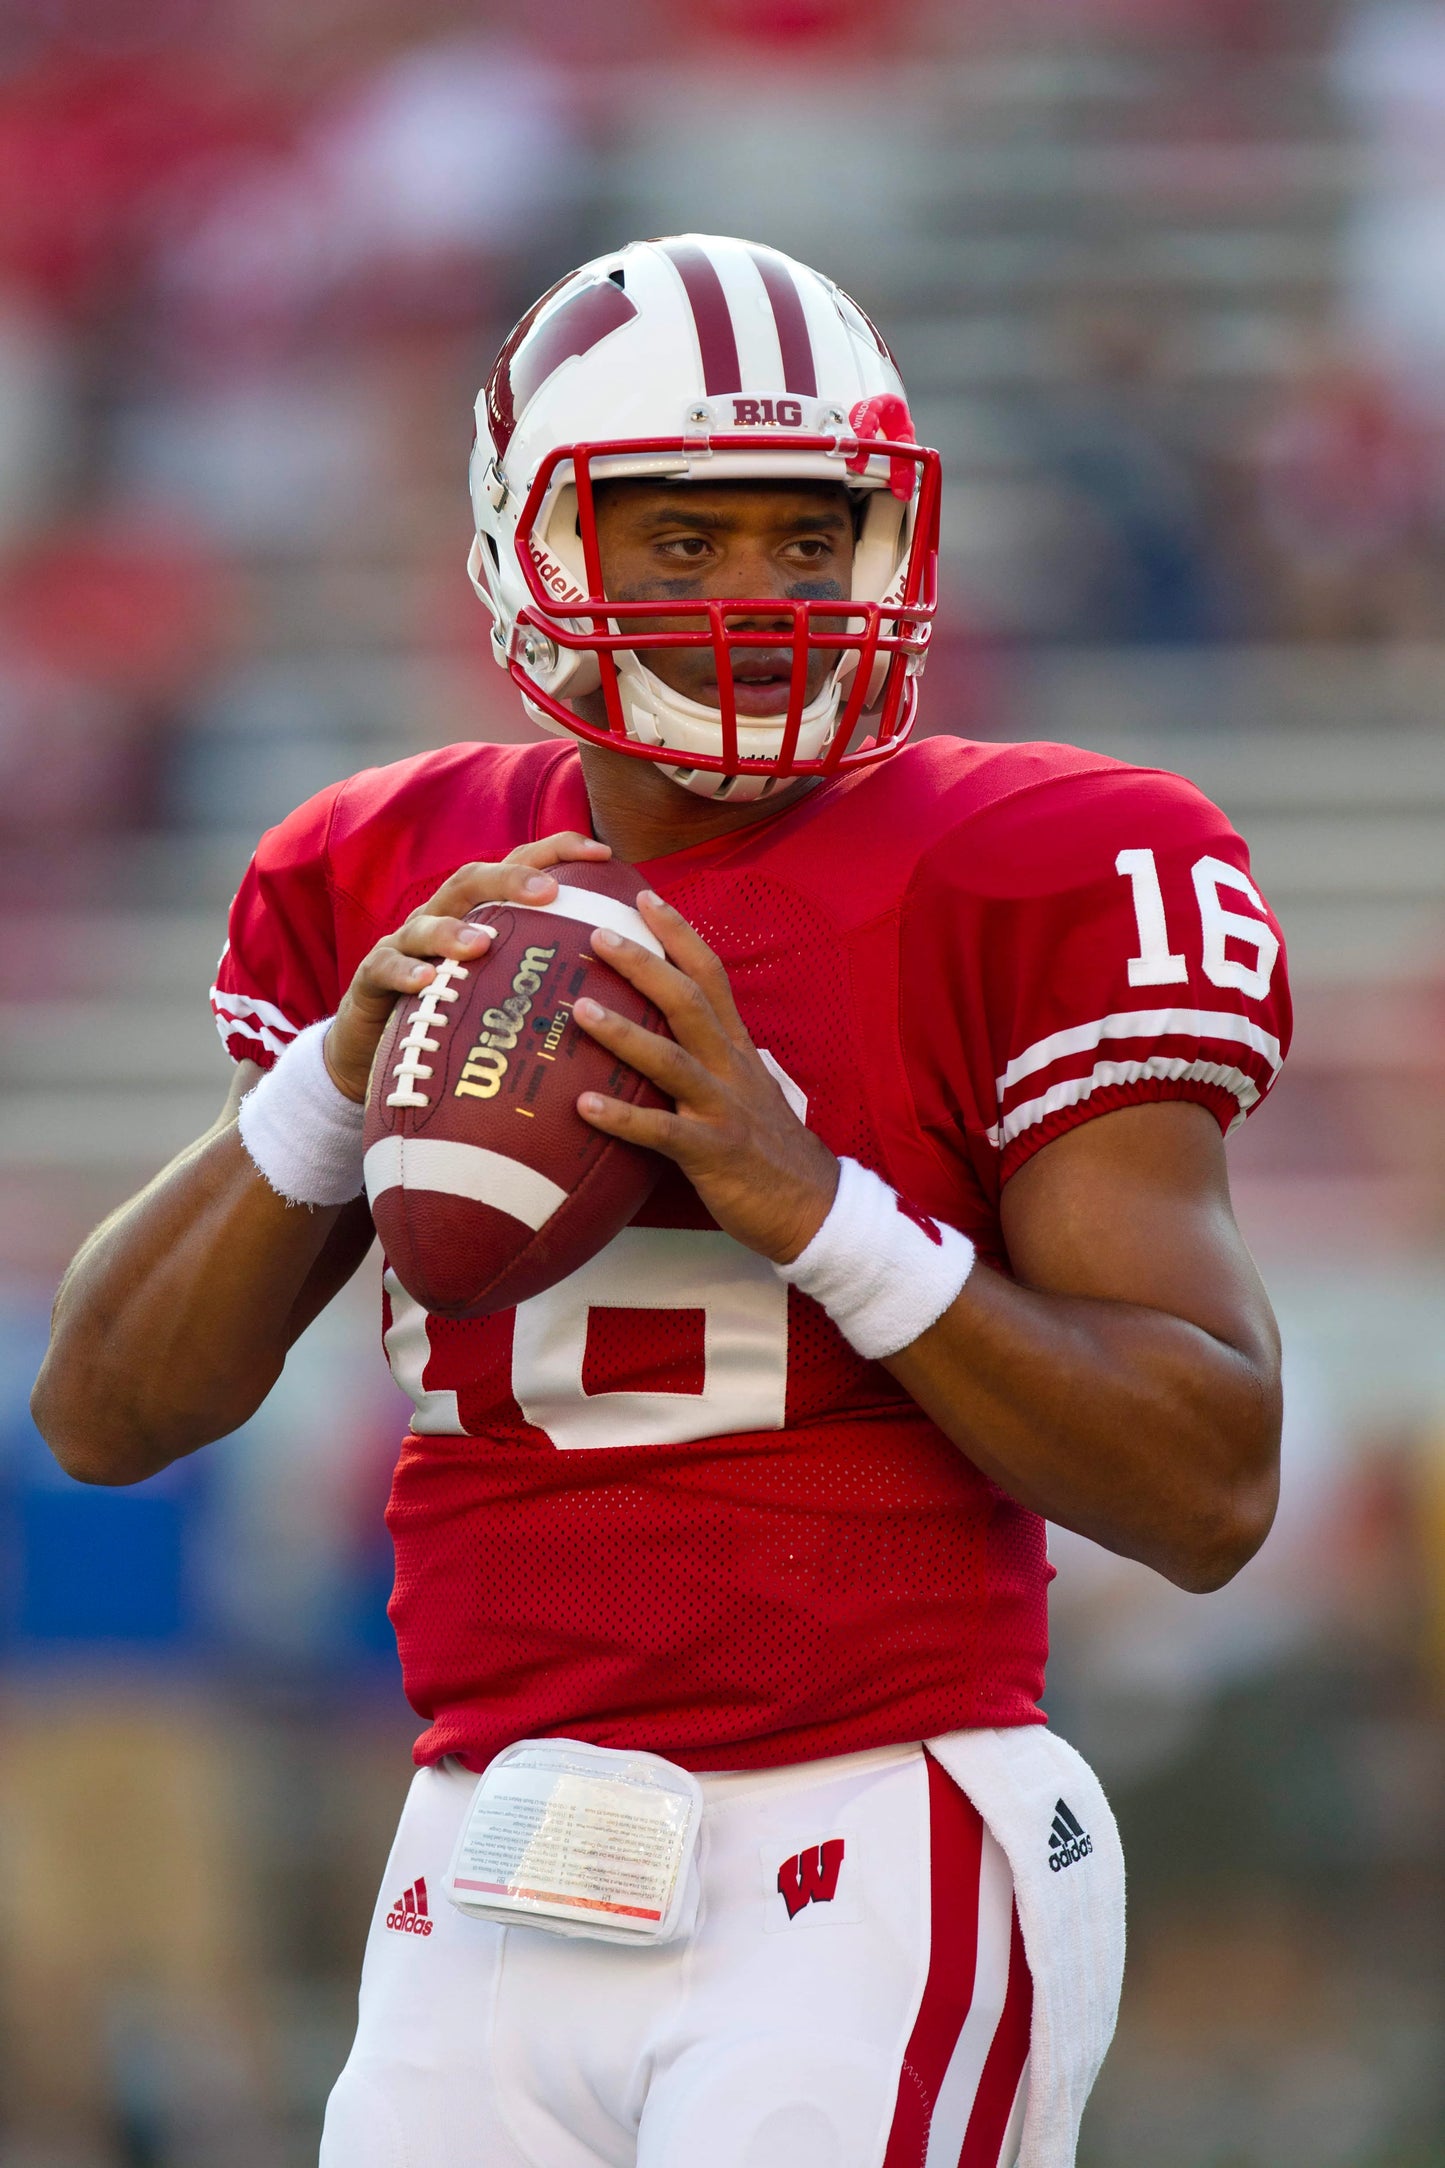 Russell Wilson Wisconsin Badgers Adidas 2013 NCAA Classic Campus Legend College Football Jersey